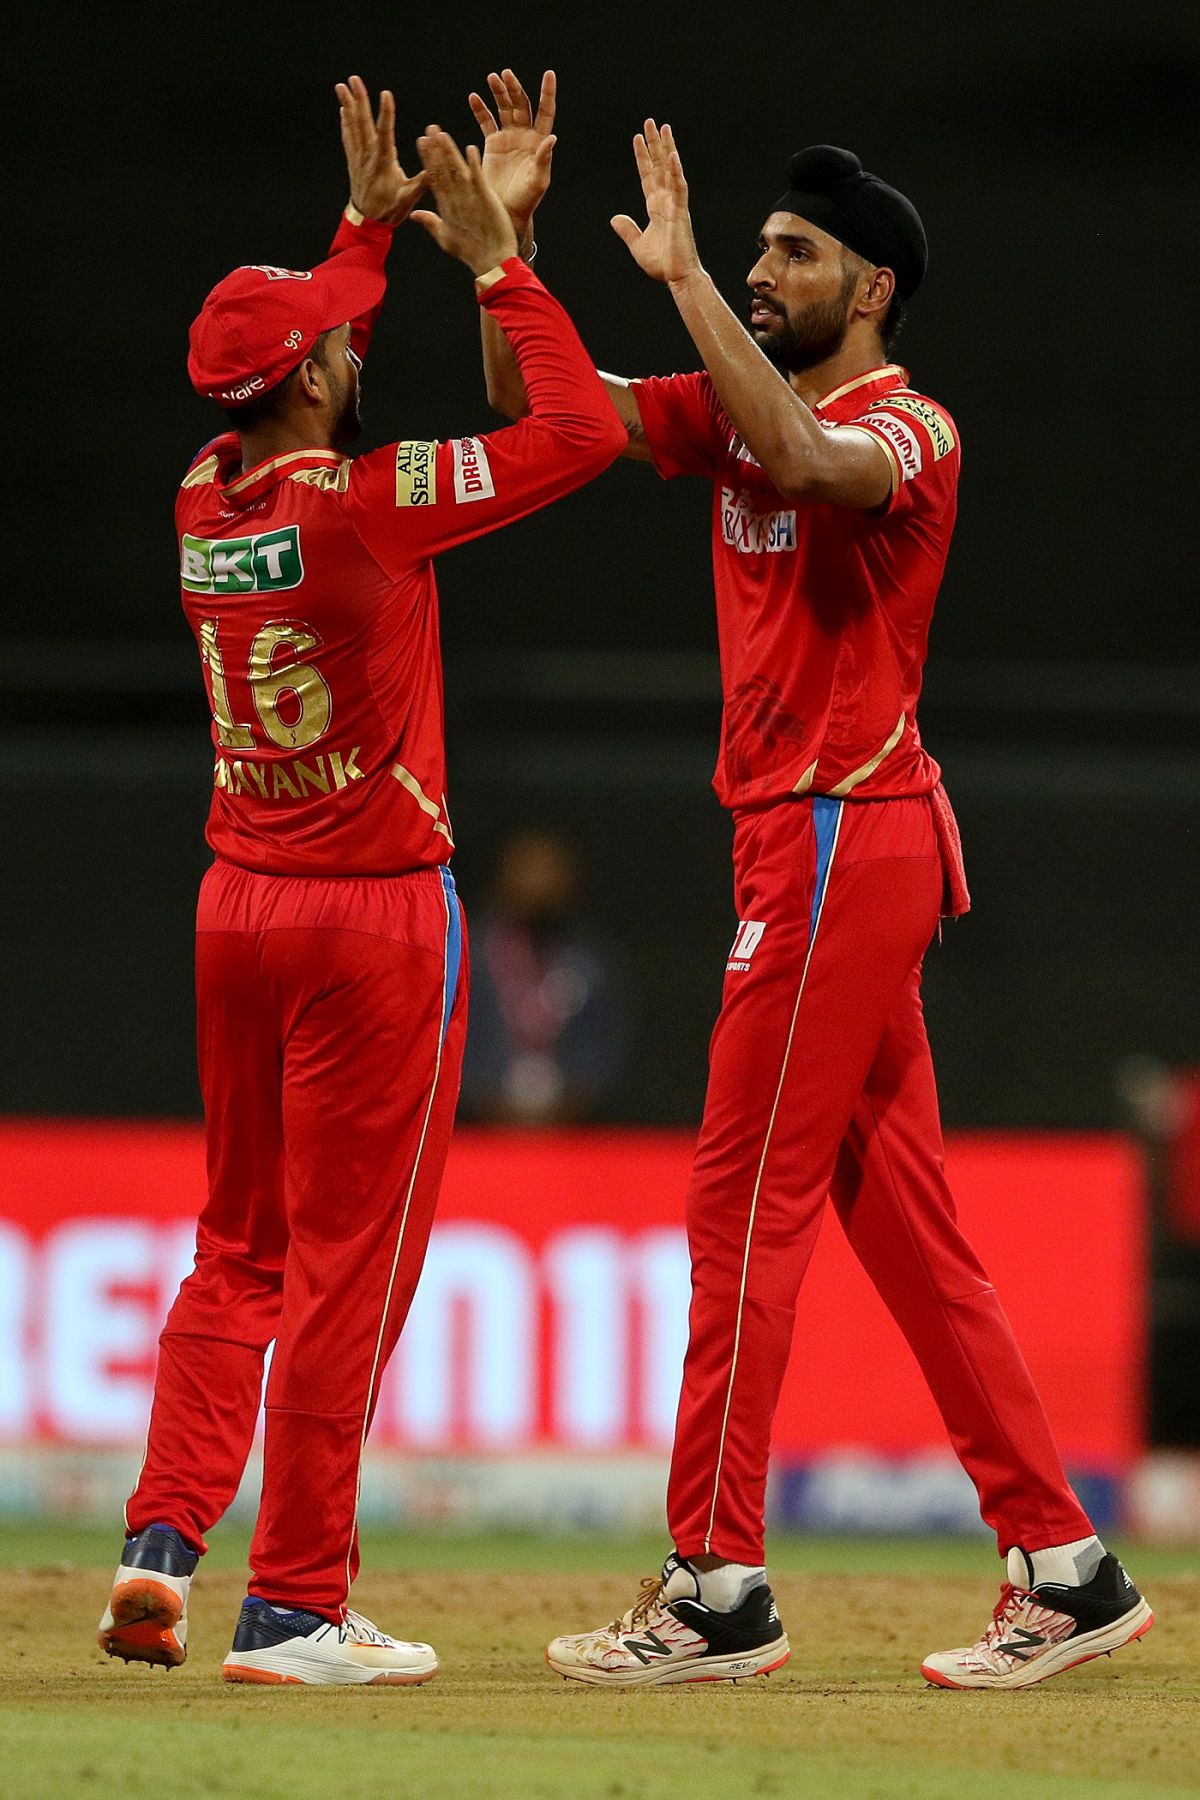 Harpreet Brar picked up two wickets in quick time to dent Sunrisers Hyderabad, Punjab Kings vs Sunrisers Hyderabad, IPL 2022, Wankhede Stadium, Mumbai, May 22, 2022 